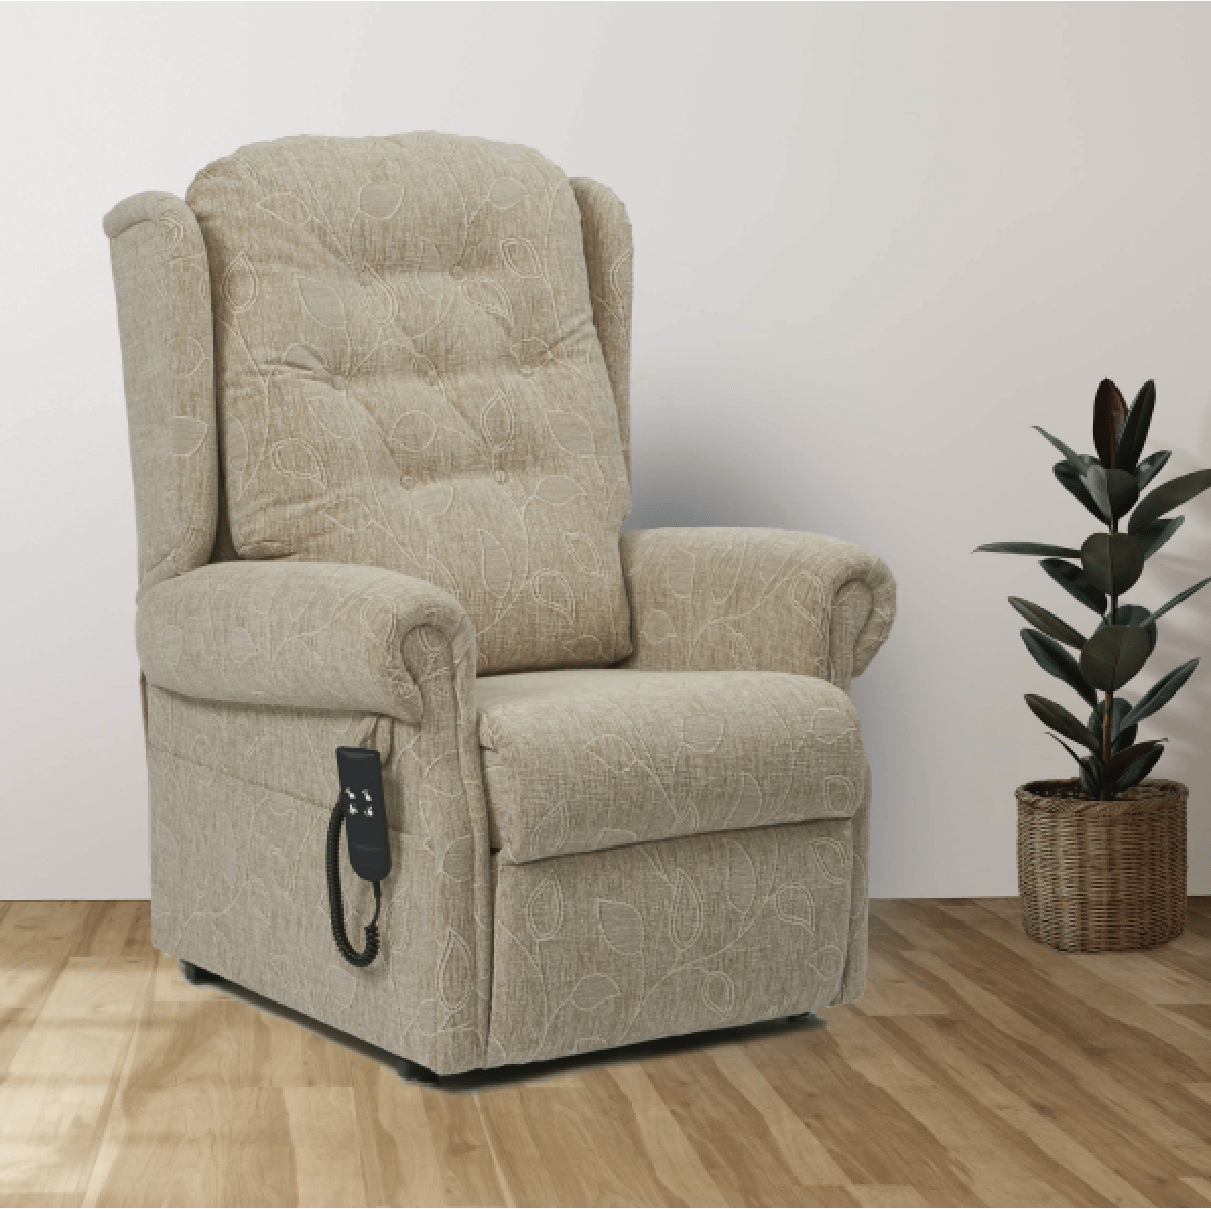 Riser Recliner Chairs, Riser Chairs & Adjustable Chair For Elderly